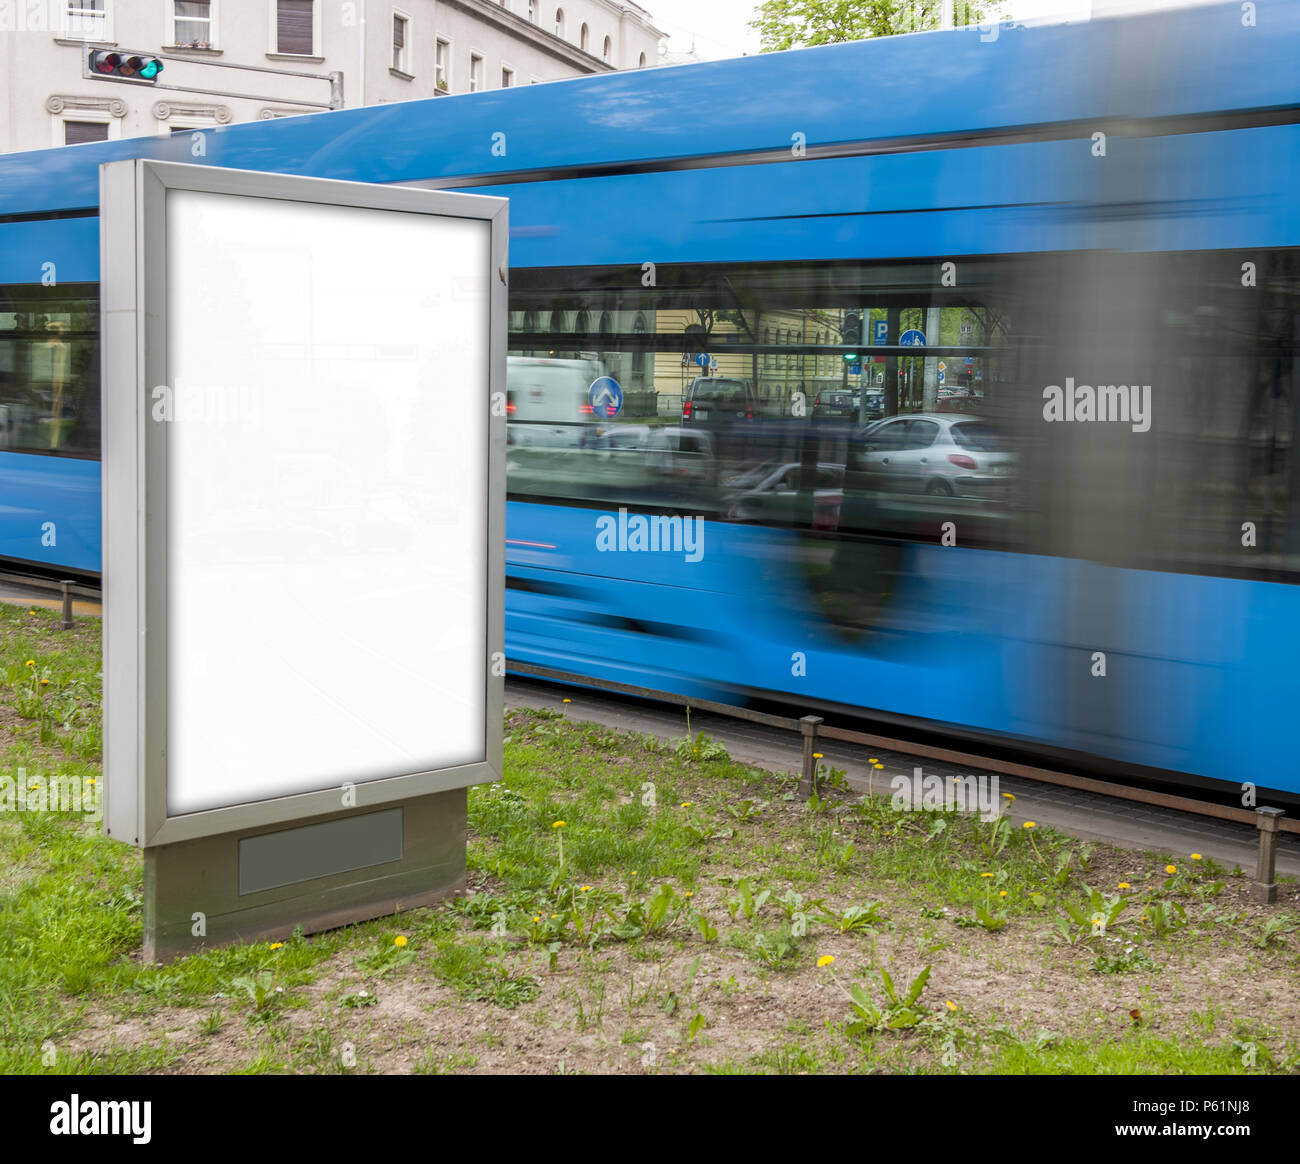 Download Blank Citylight Poster Mockup With A Tram In Background Stock Photo Alamy